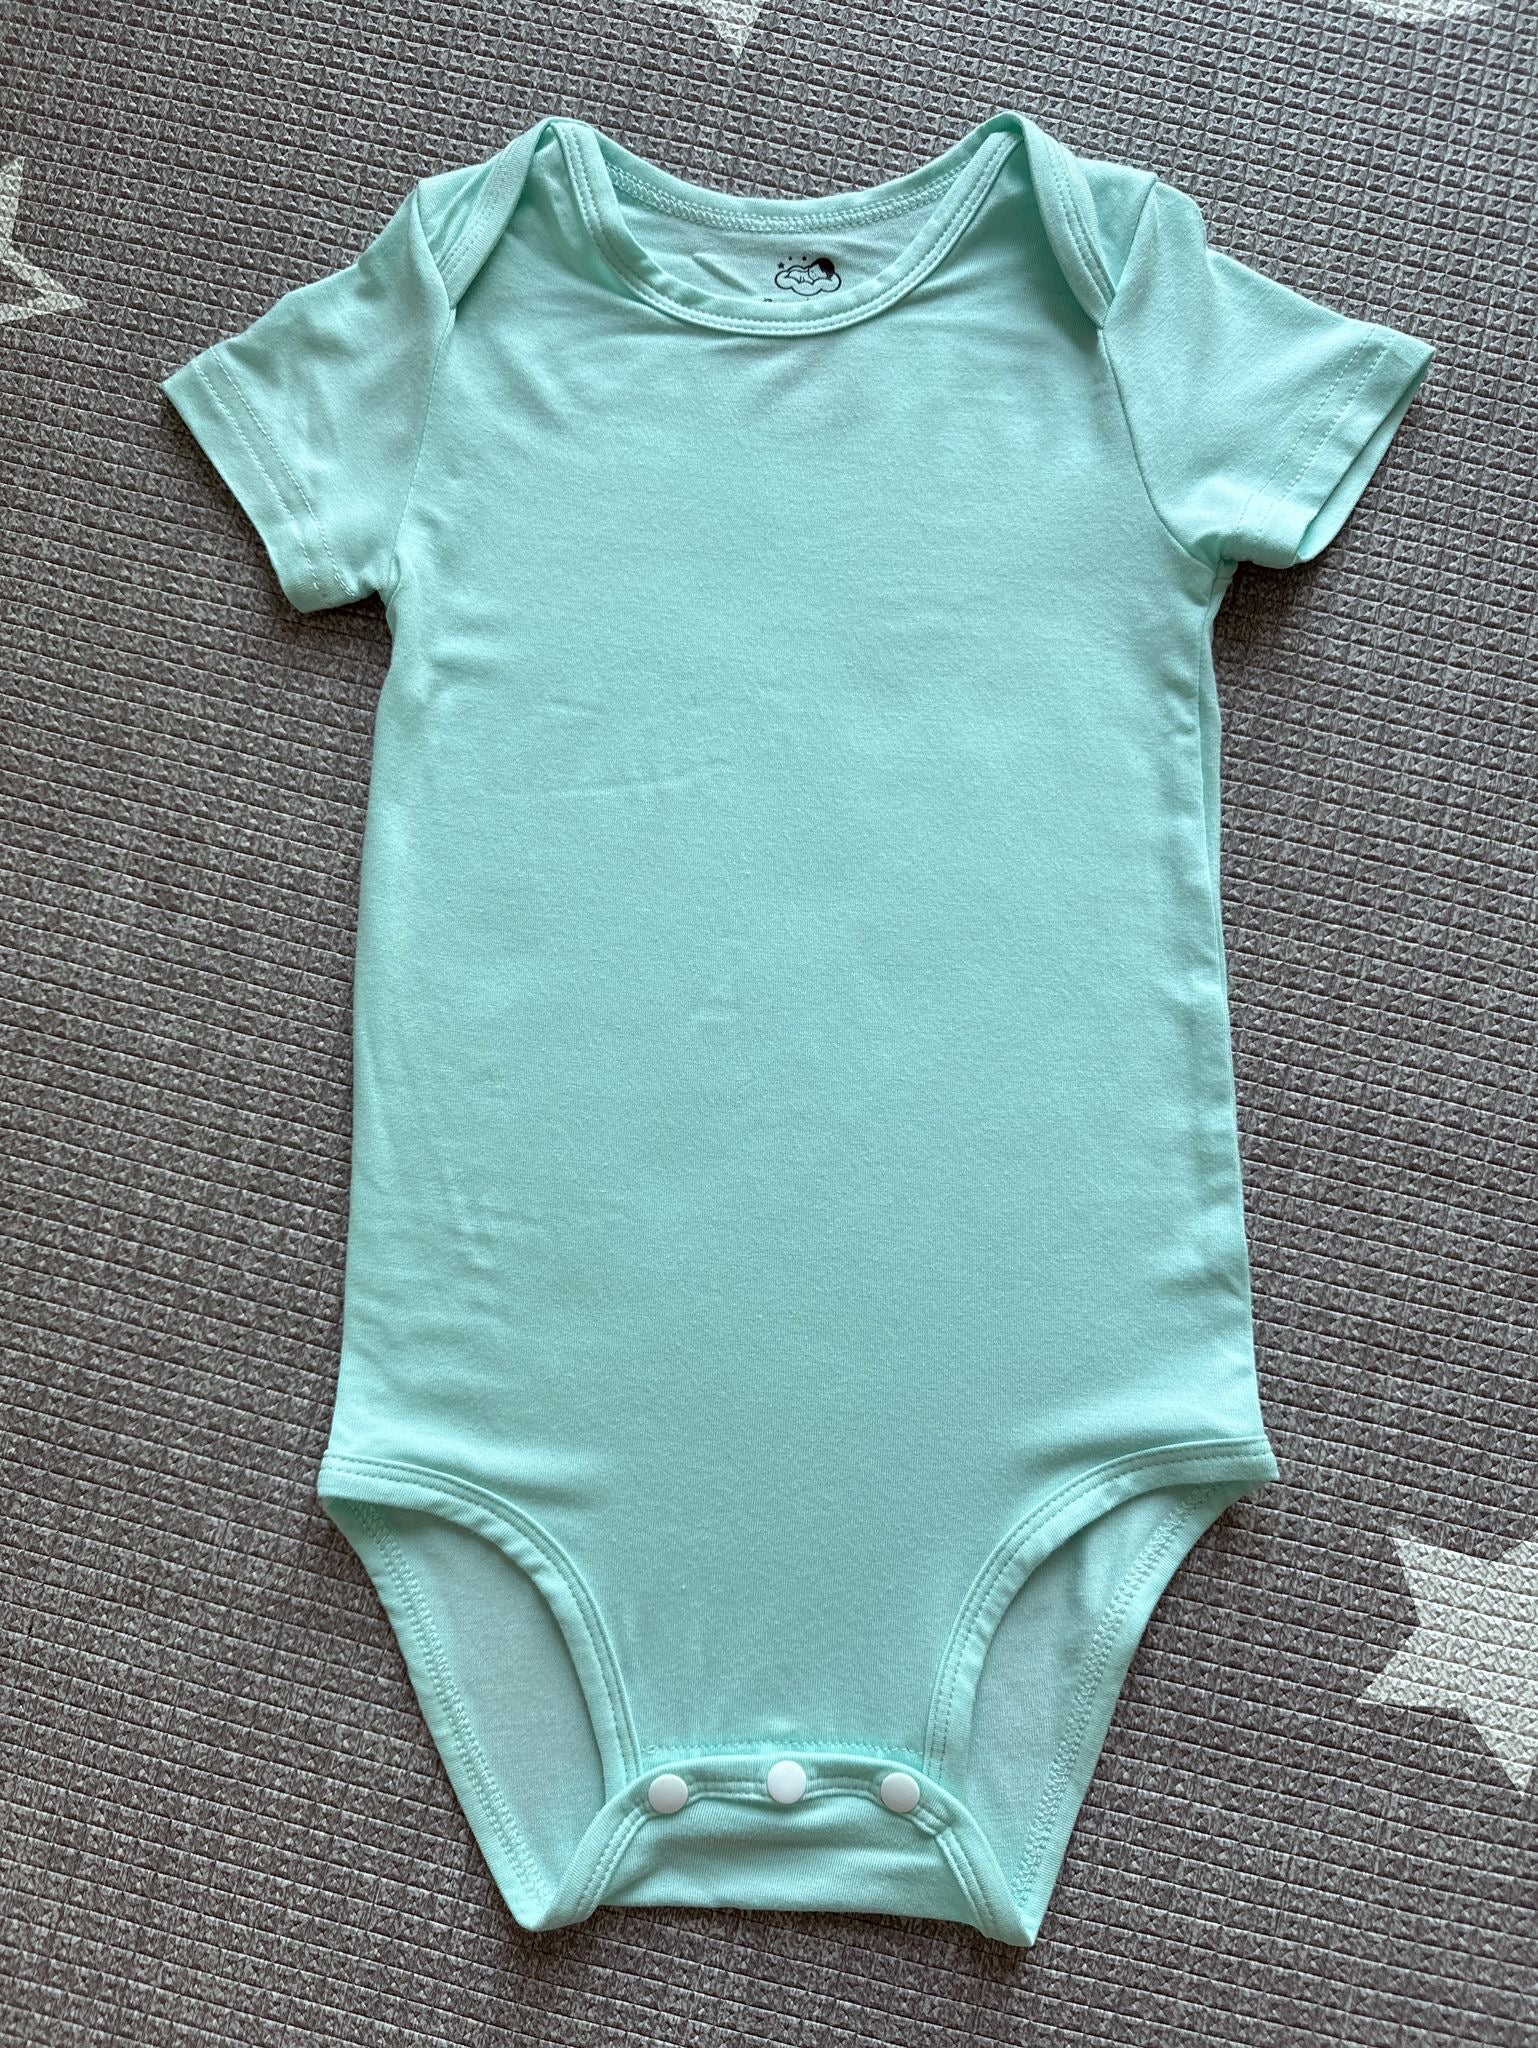 Dose of Steps | Plain Color Onesies (Designed in Singapore)